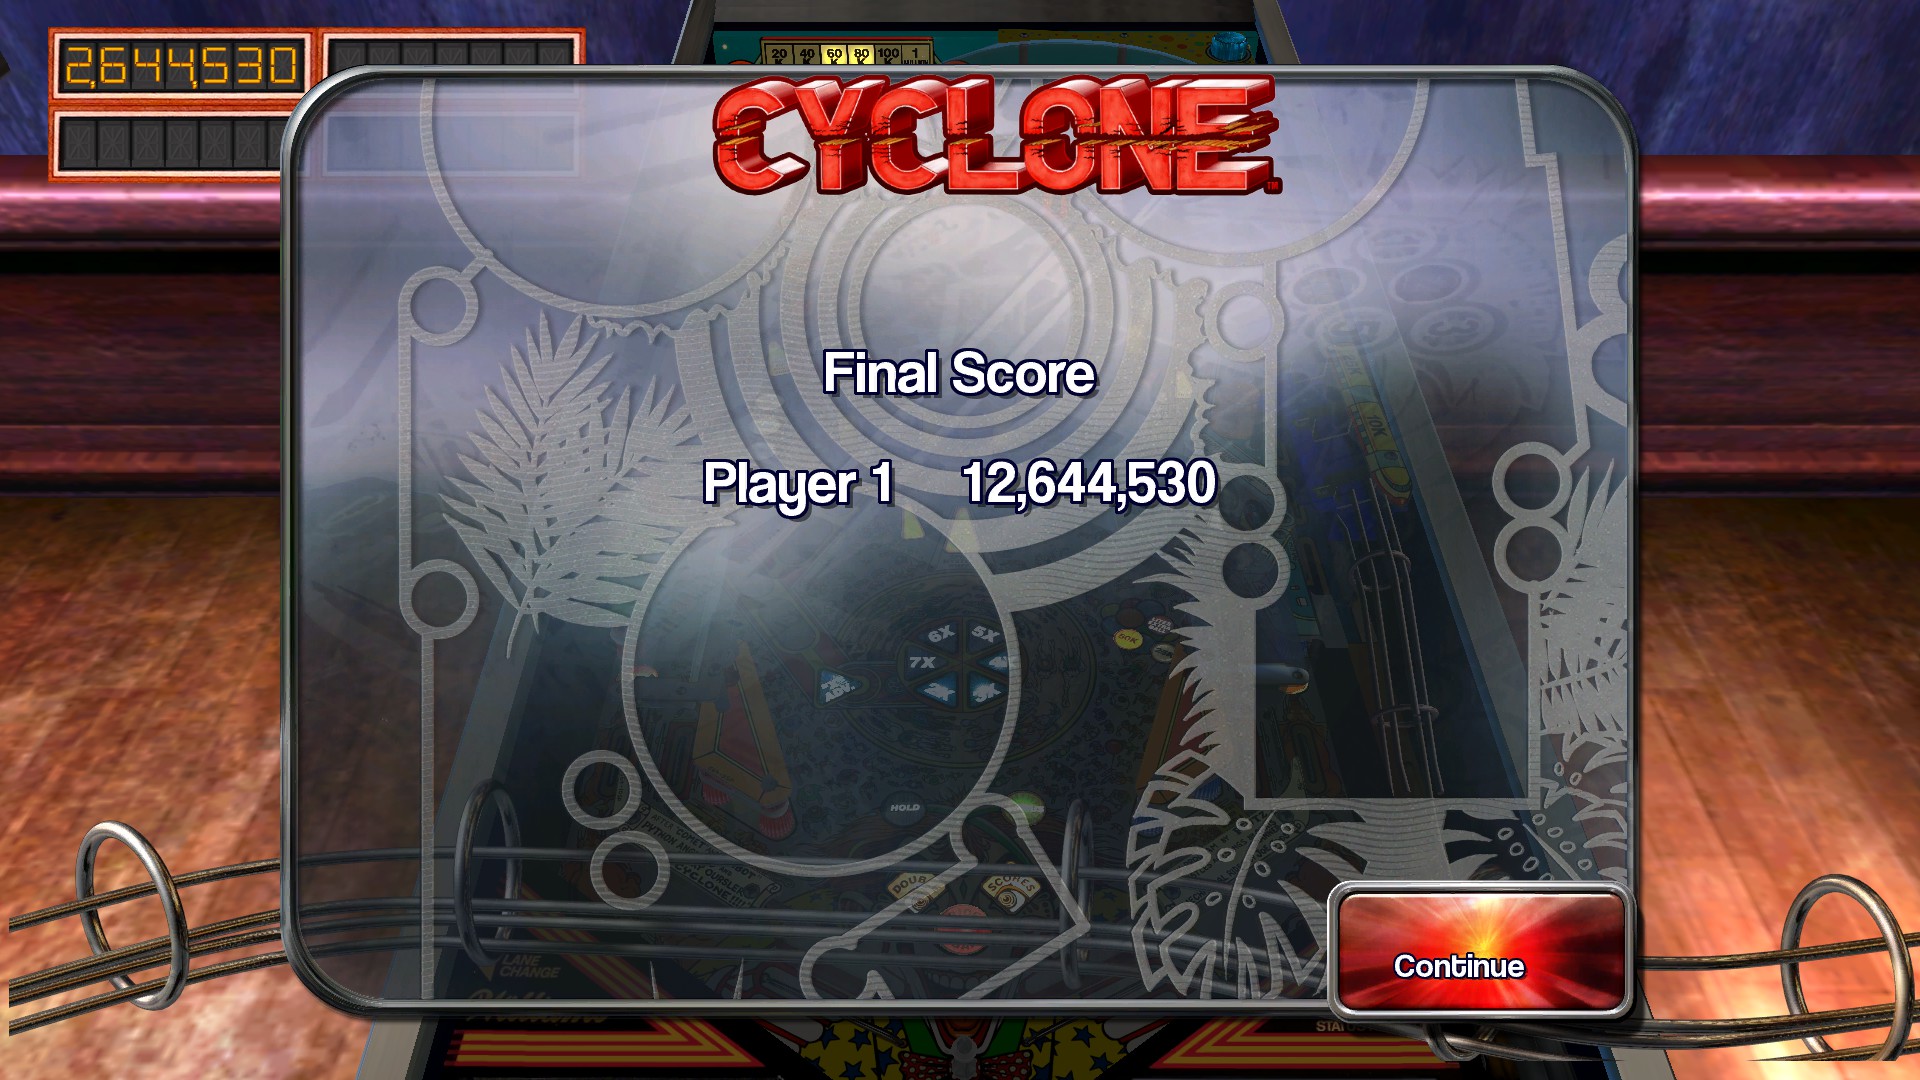 TheTrickster: Pinball Arcade: Cyclone (PC) 12,644,530 points on 2016-03-04 04:05:24